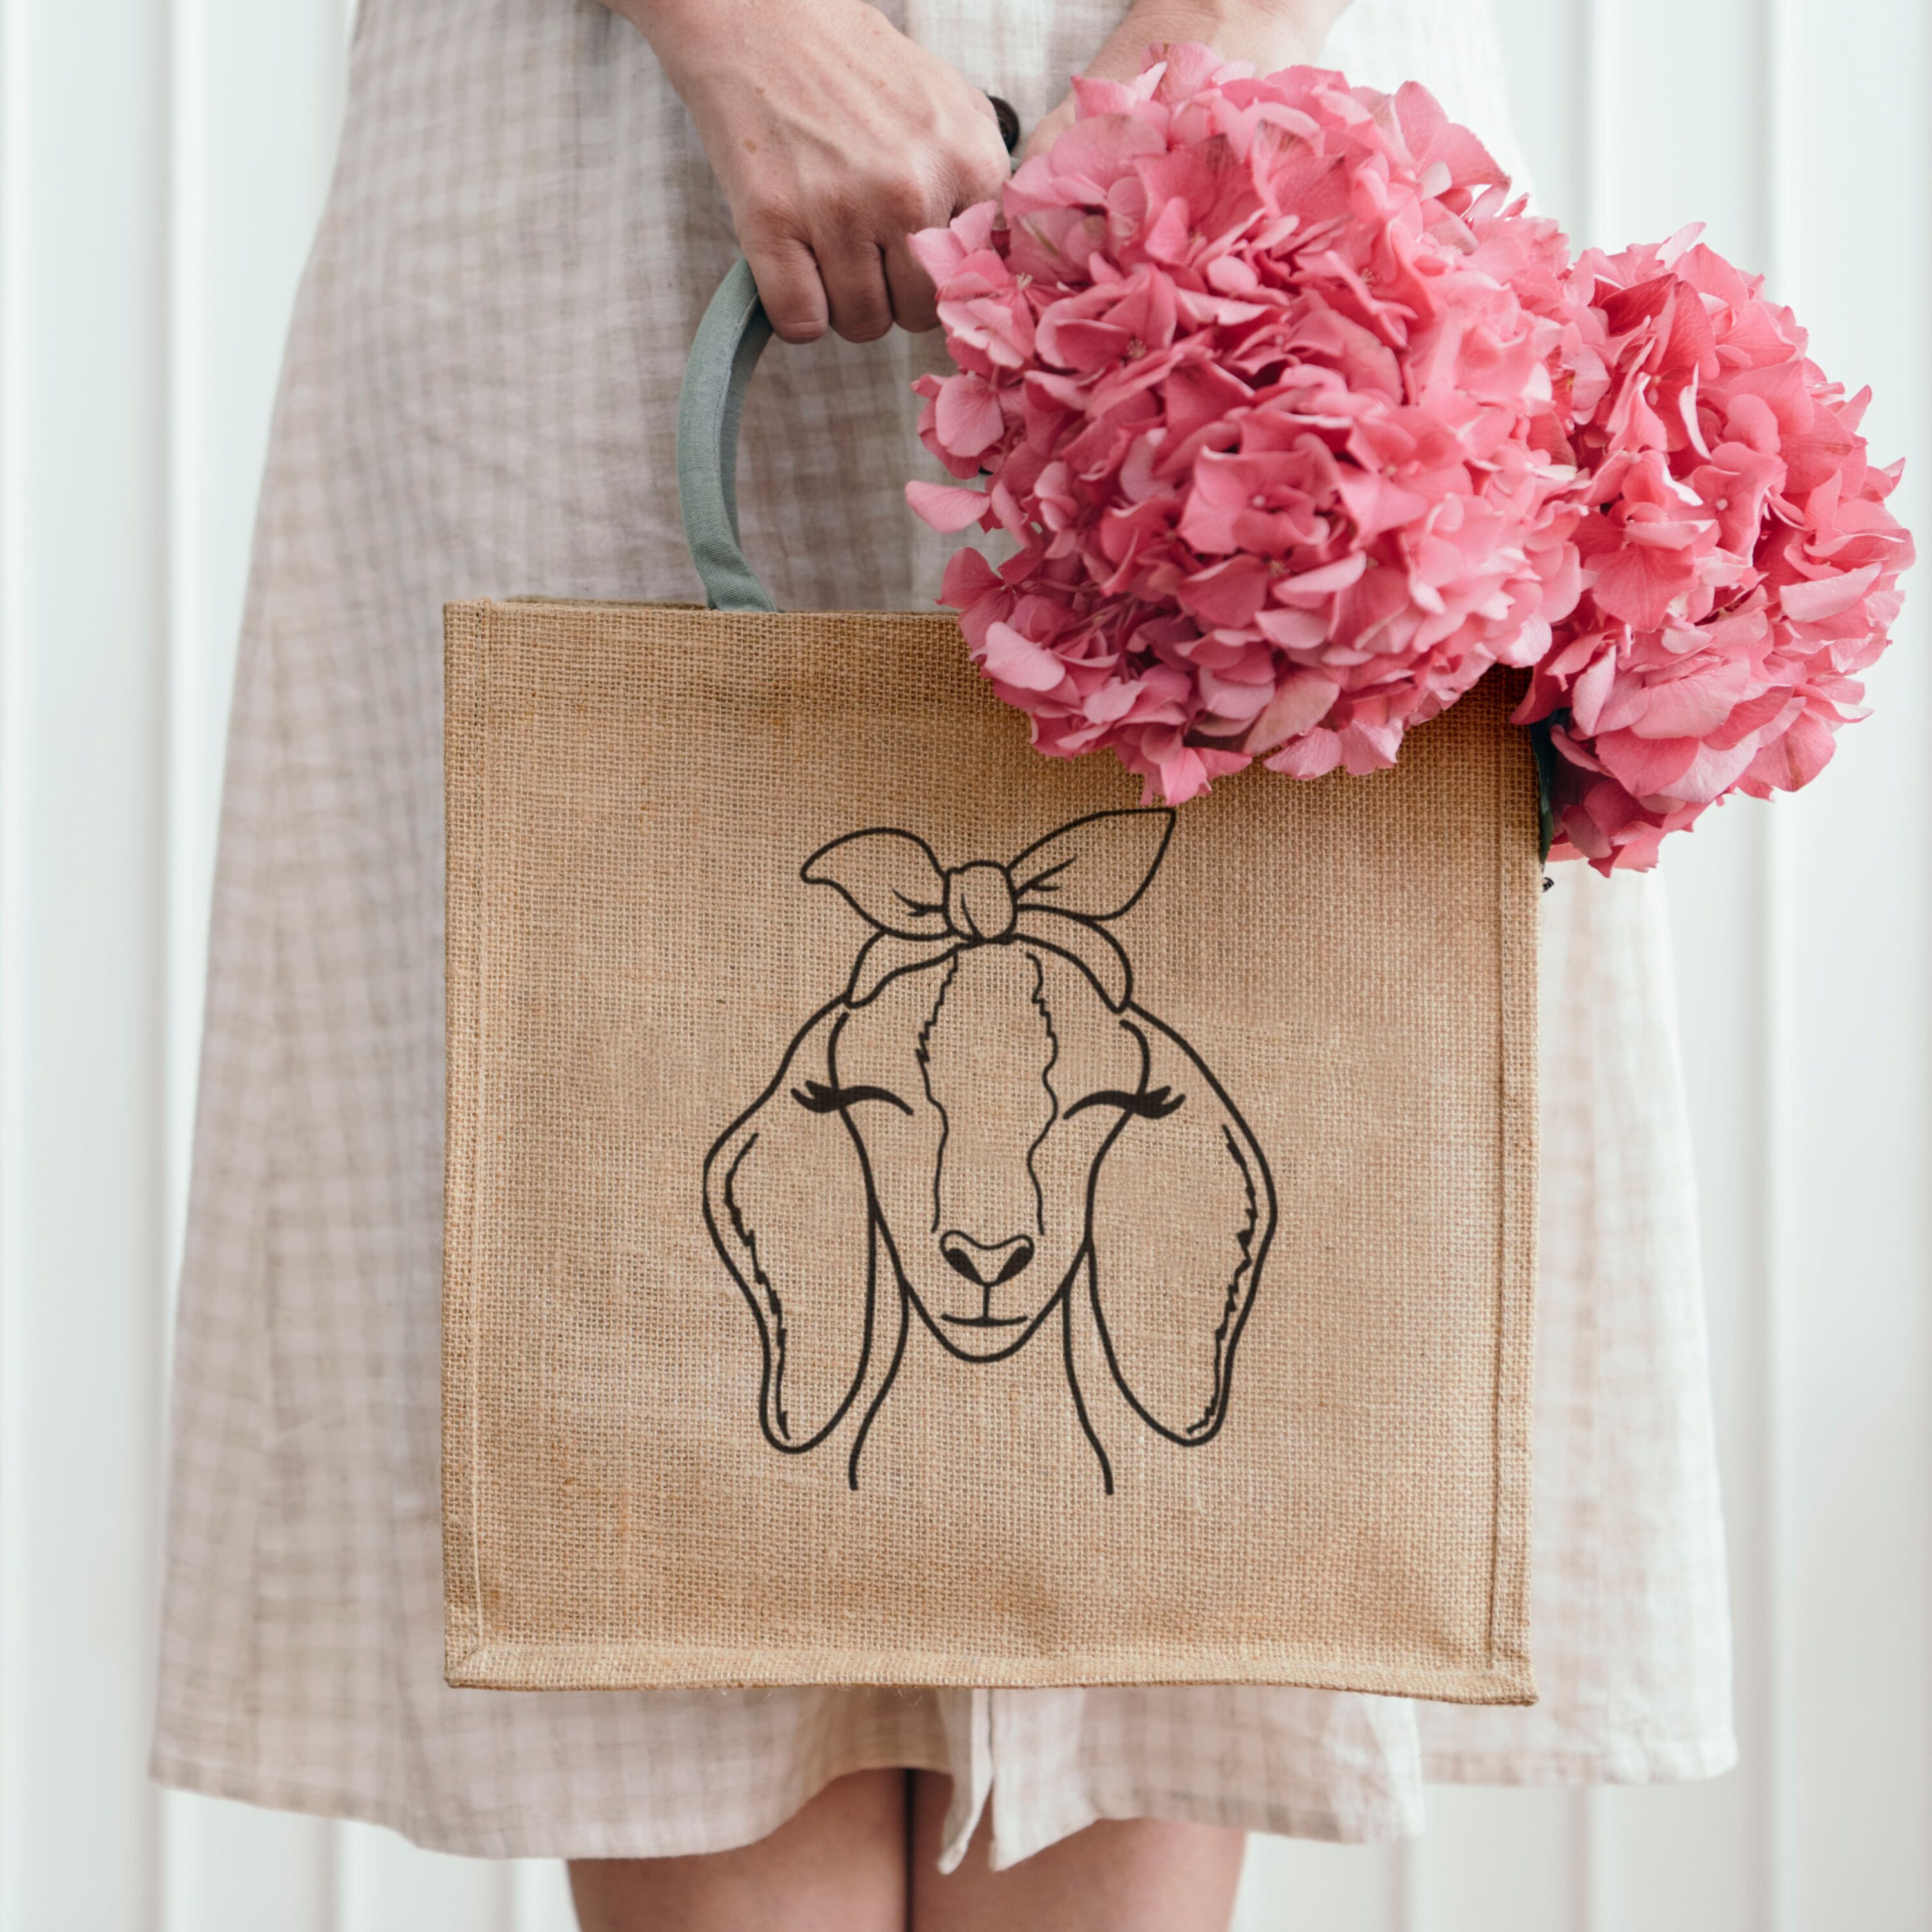 Woman holding a bag with a picture of a sheep on it.